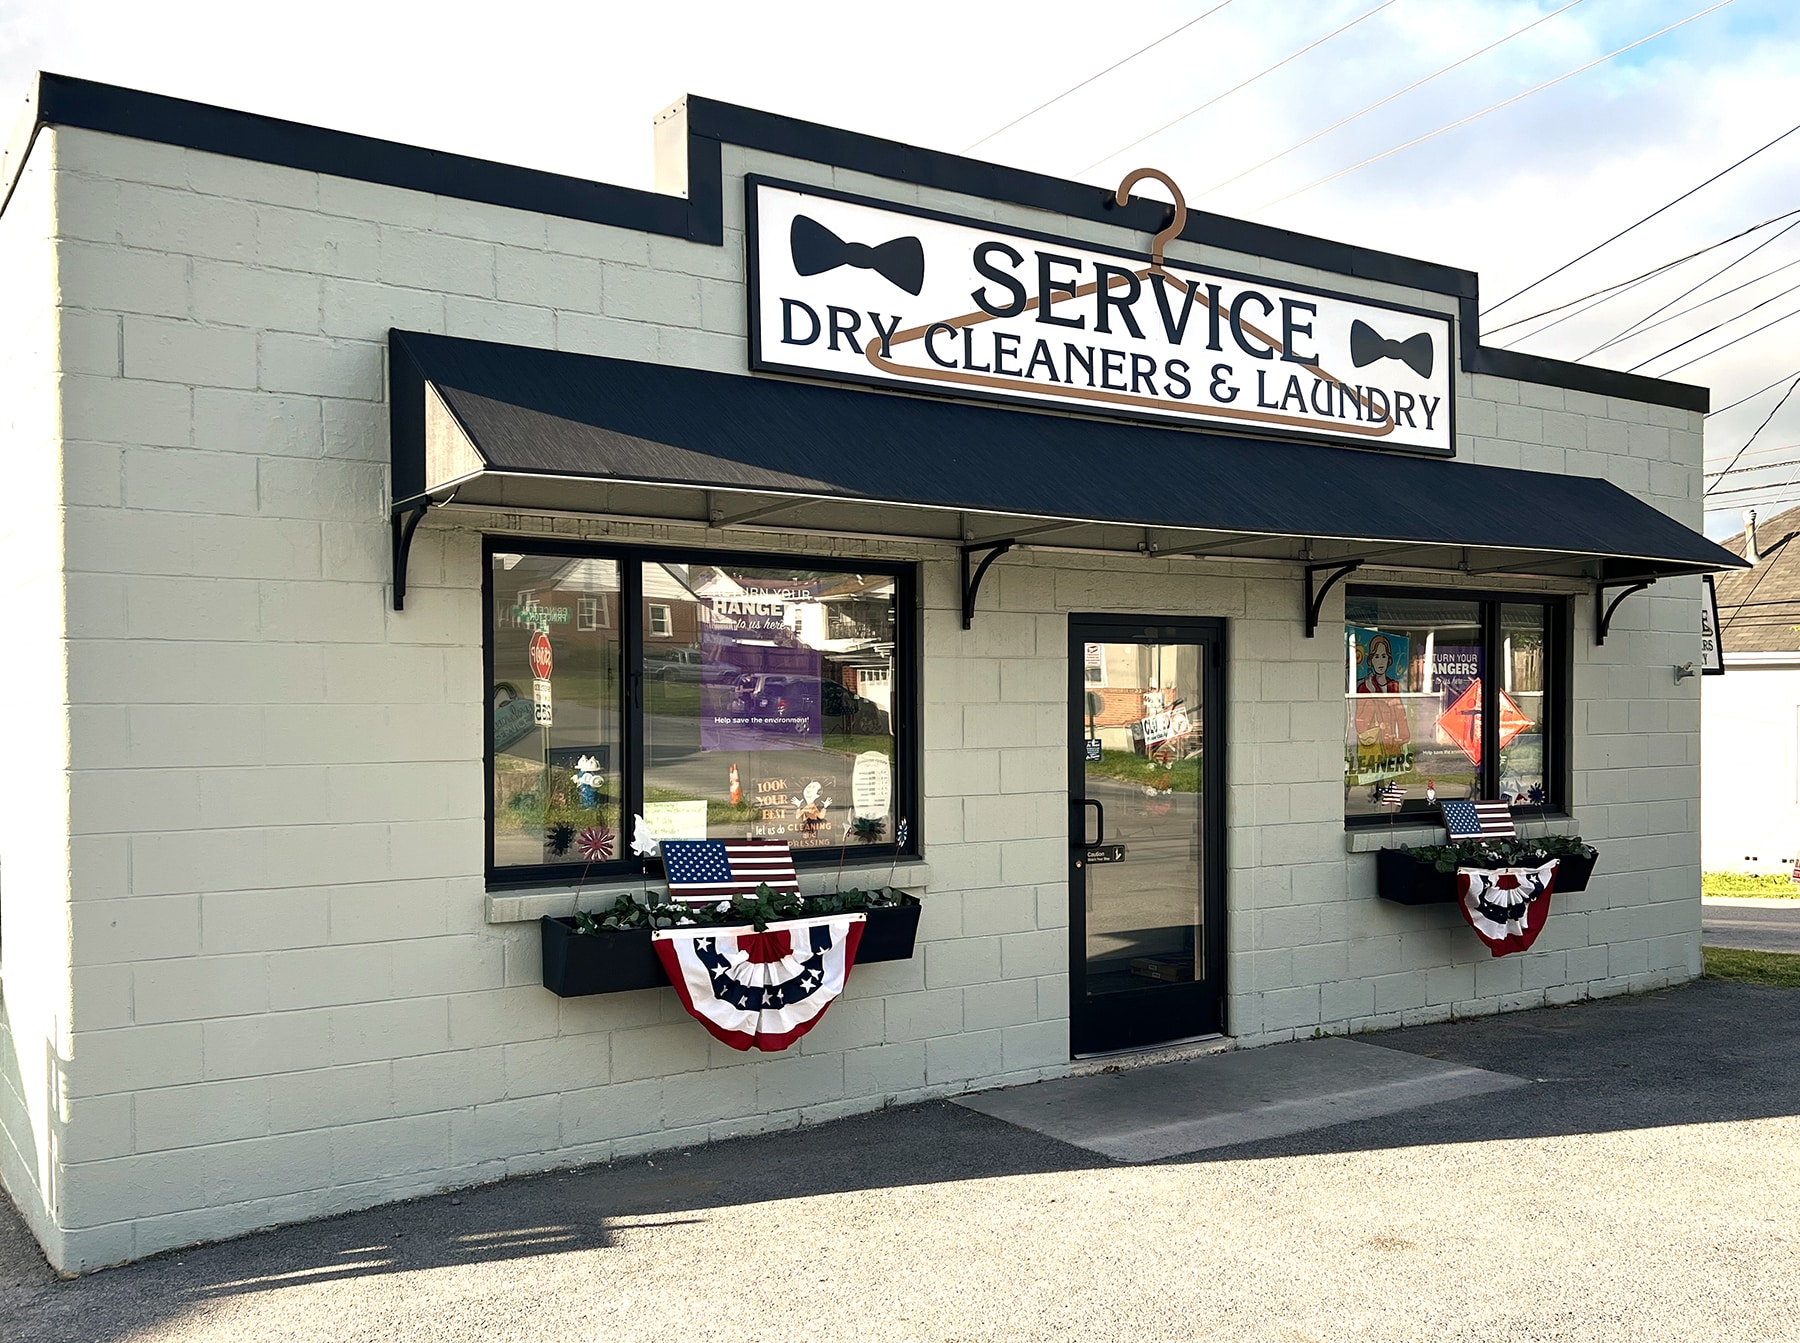 This is a photo of Service Cleaners Inc. storefront, located in Princeton.